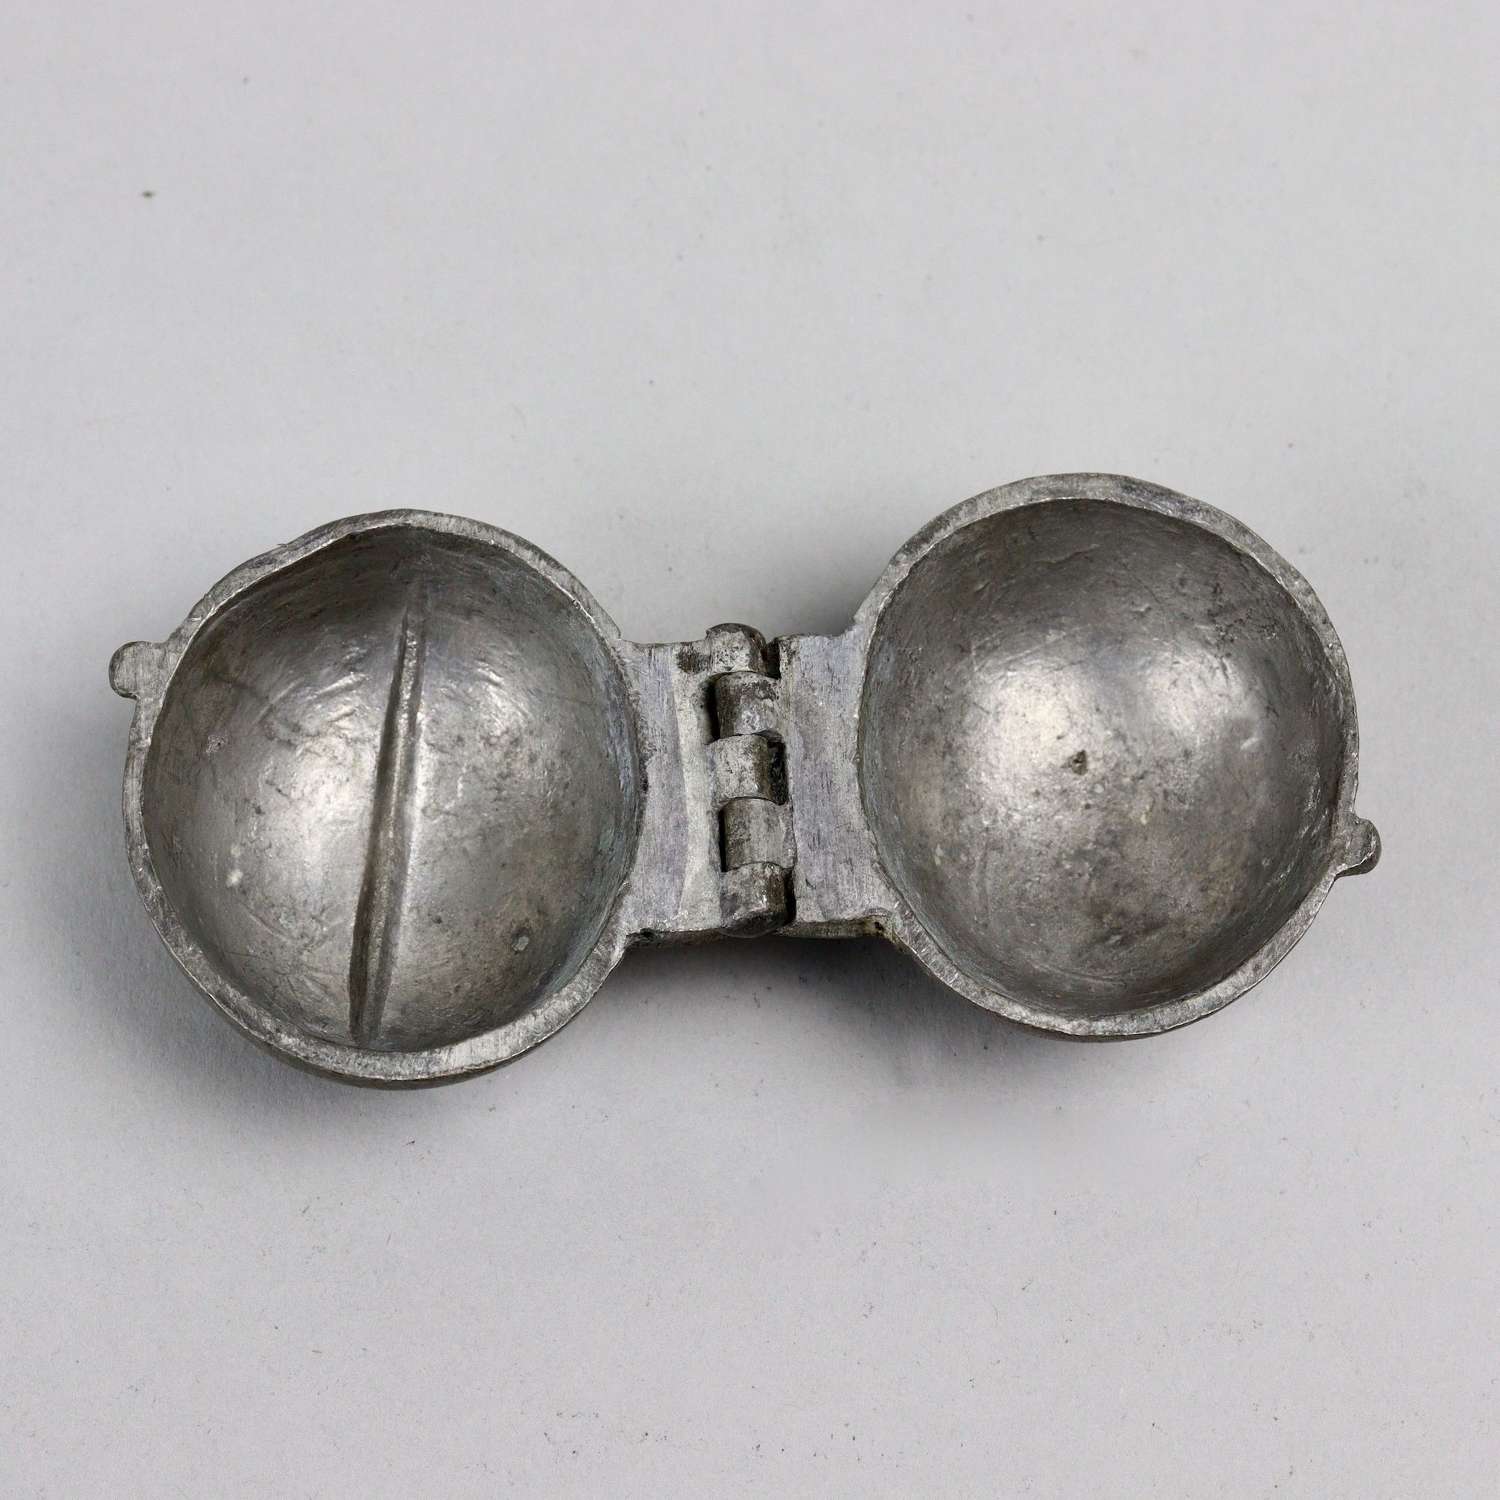 Pewter ice mould in the shape of a plum